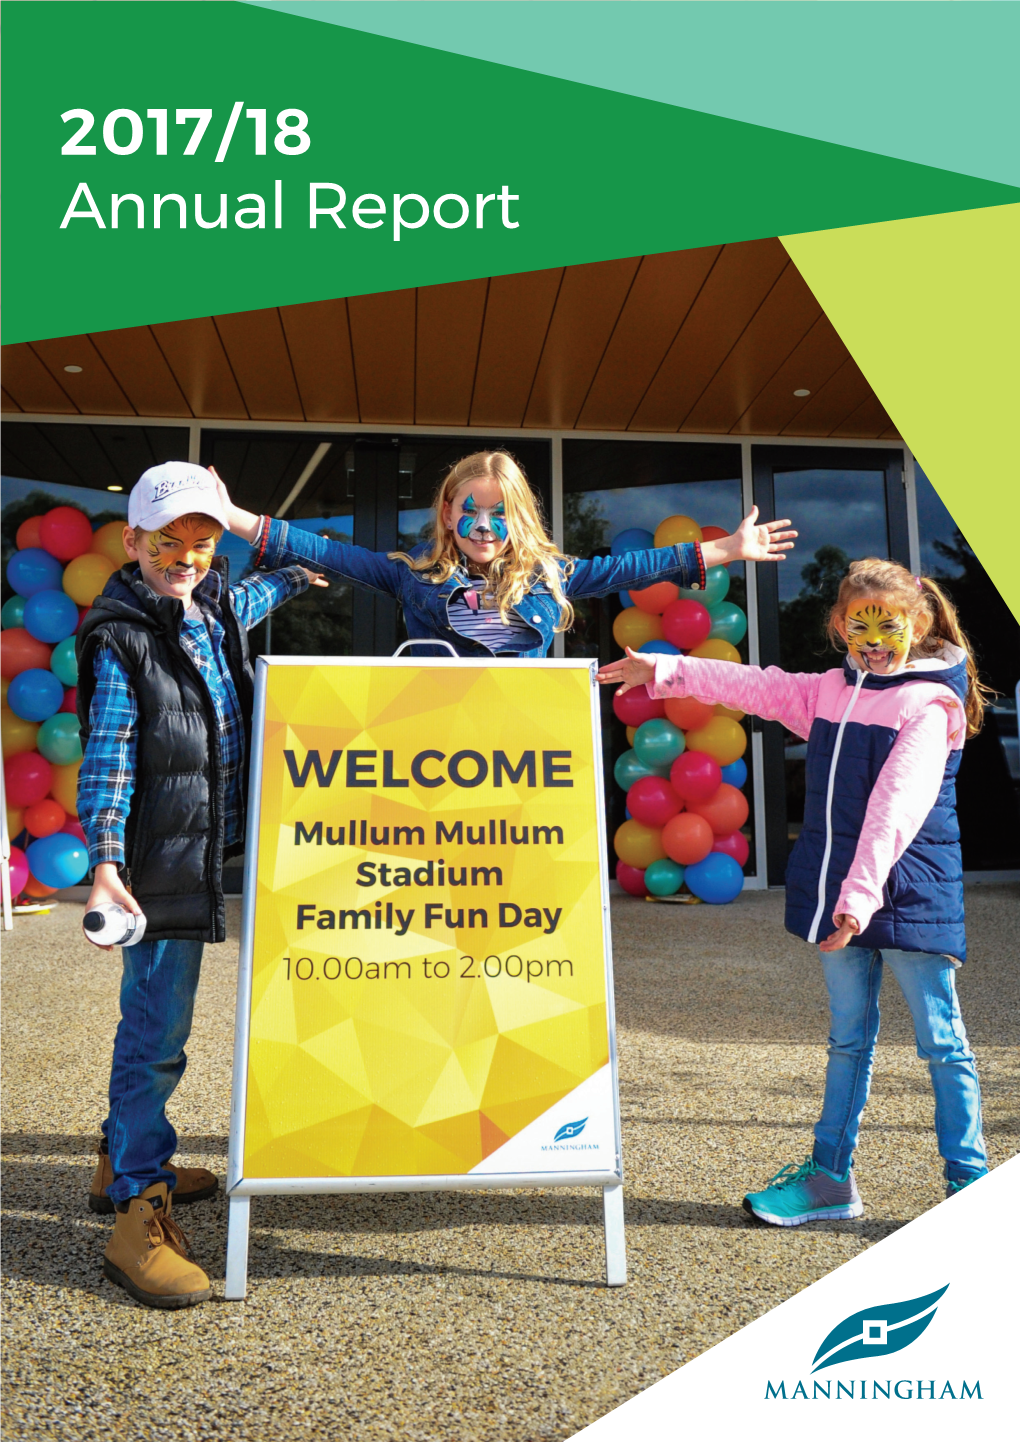 Manningham Council Annual Report 2017/18